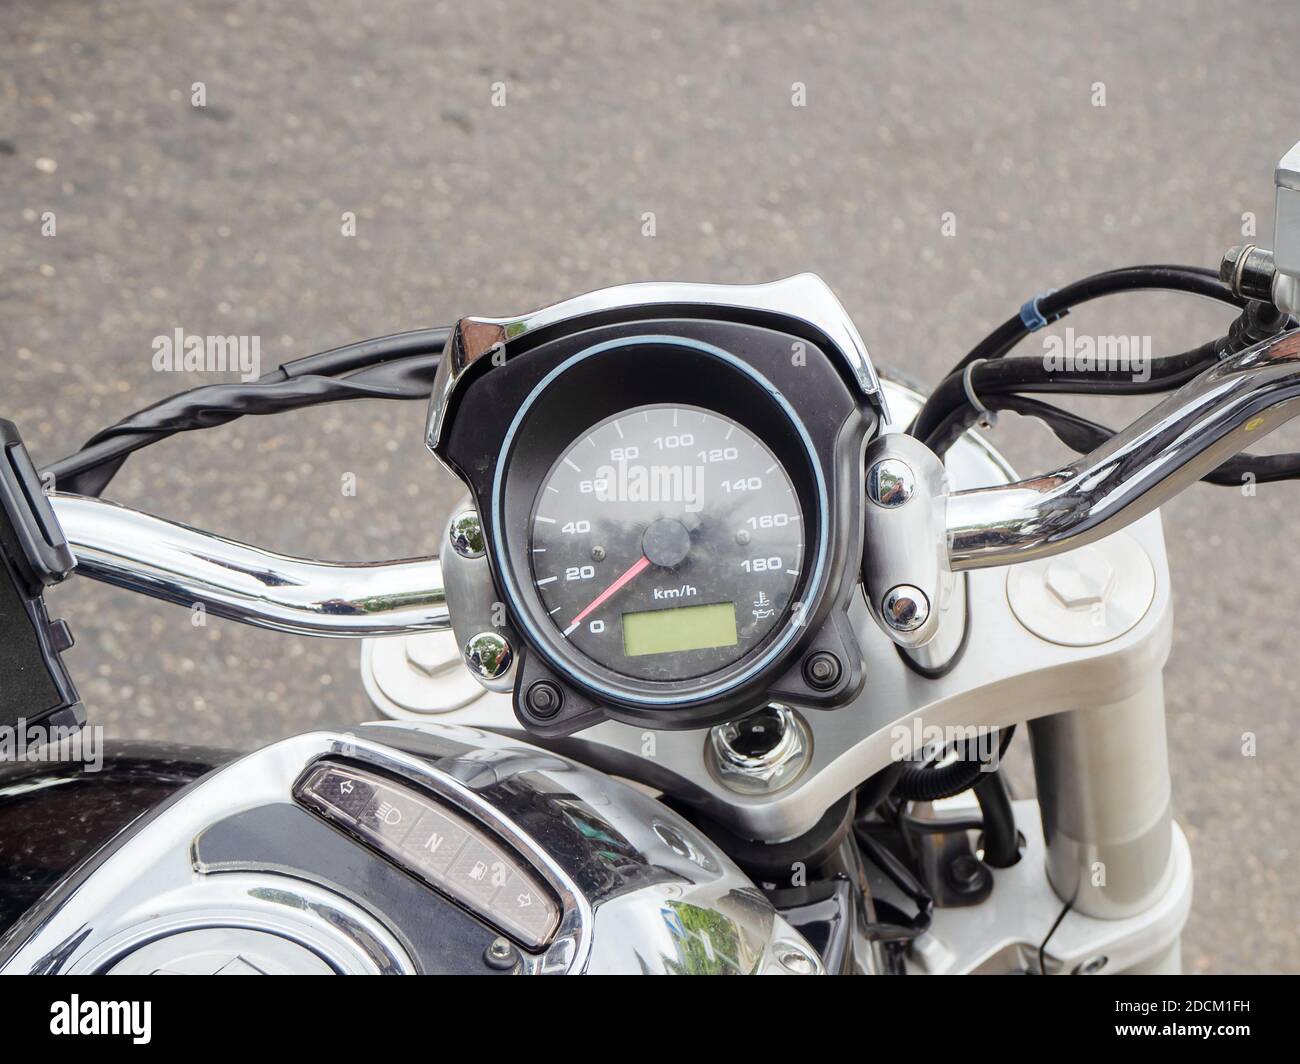 Fragment of a motorcycle steering wheel with a round speedometer. Close-up photo Stock Photo